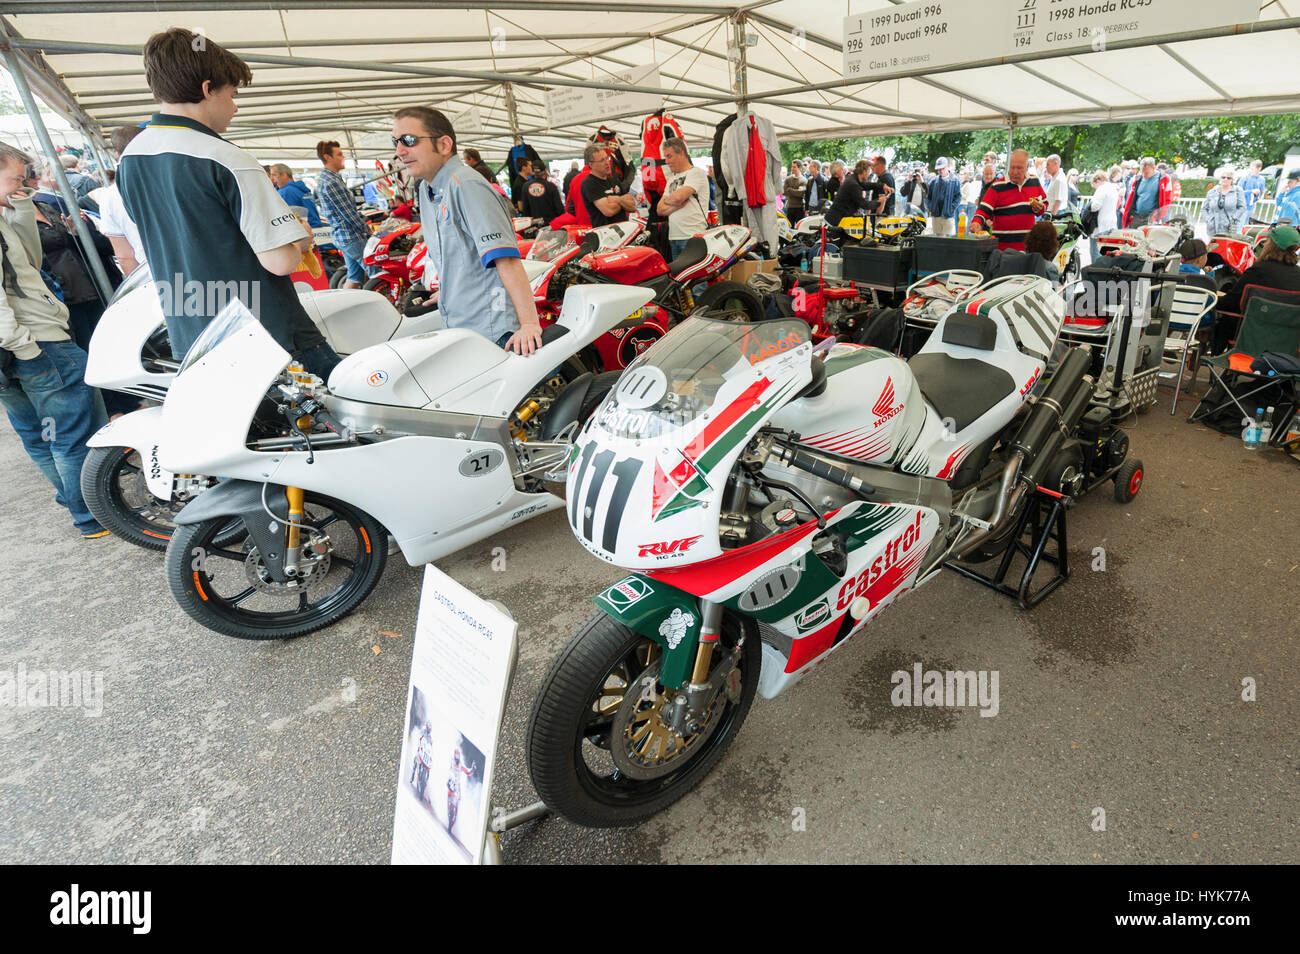 Goodwood, UK - July 1, 2012: Classic Honda and Ducati racing bikes in the service pits at the Festival of Speed motor-sport event held at Goodwood, UK Stock Photo